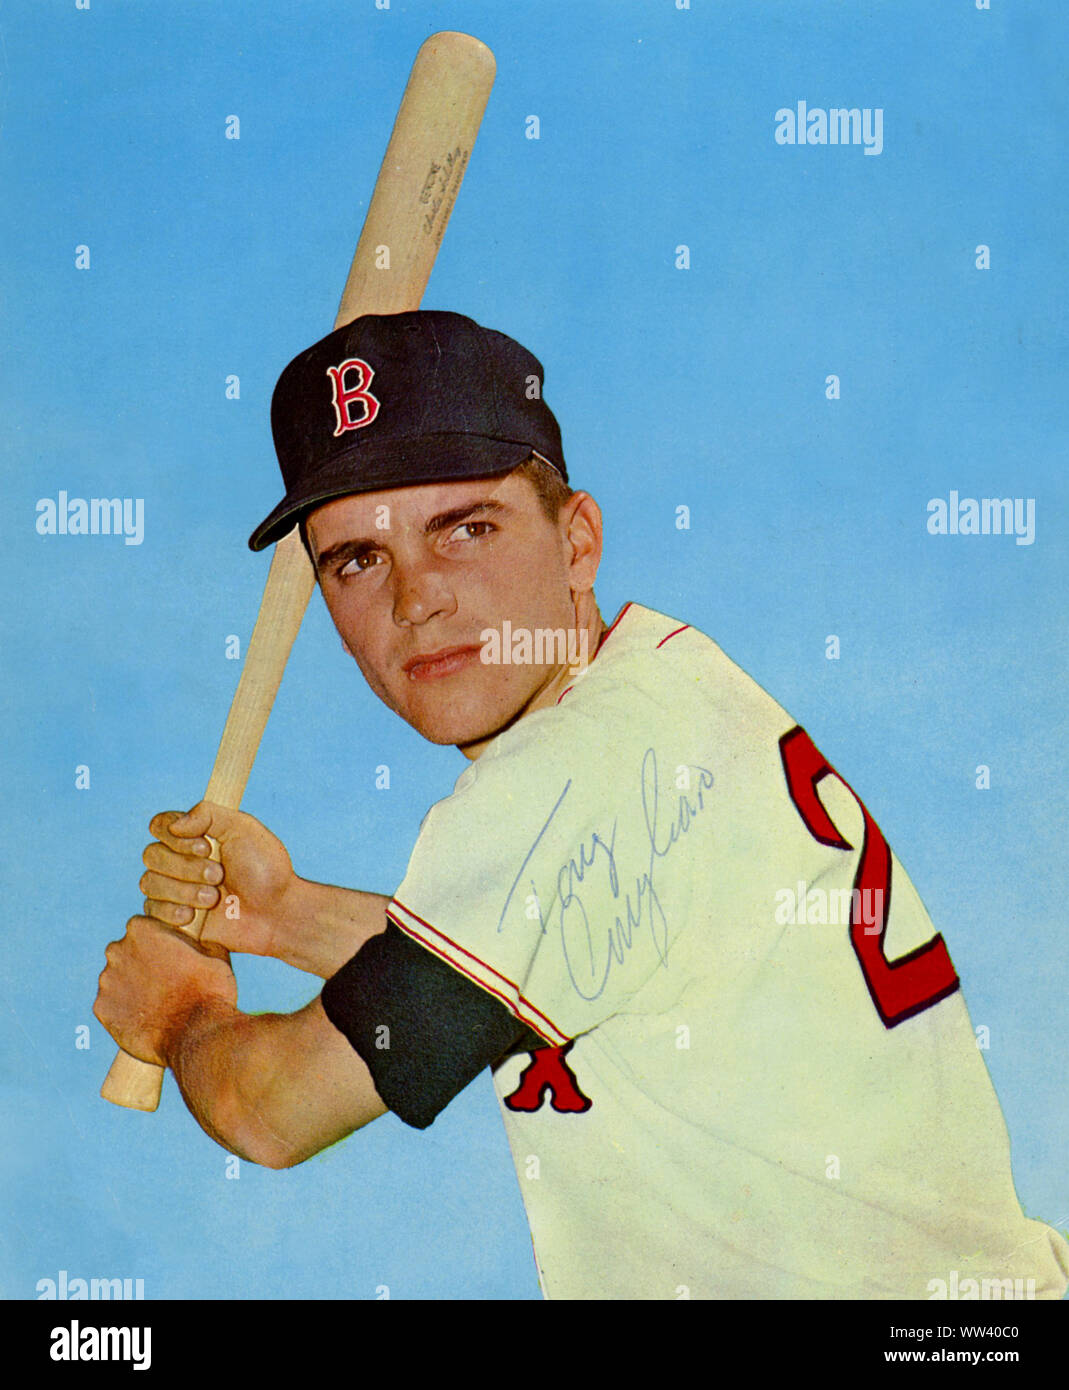 Autographed photo of Tony Conigliaro who as a young rising star player with the Boston Red Sox in the 1960's was hit in the face with a pitch and never regained his status, though he played again until the mid 1970's. Stock Photo